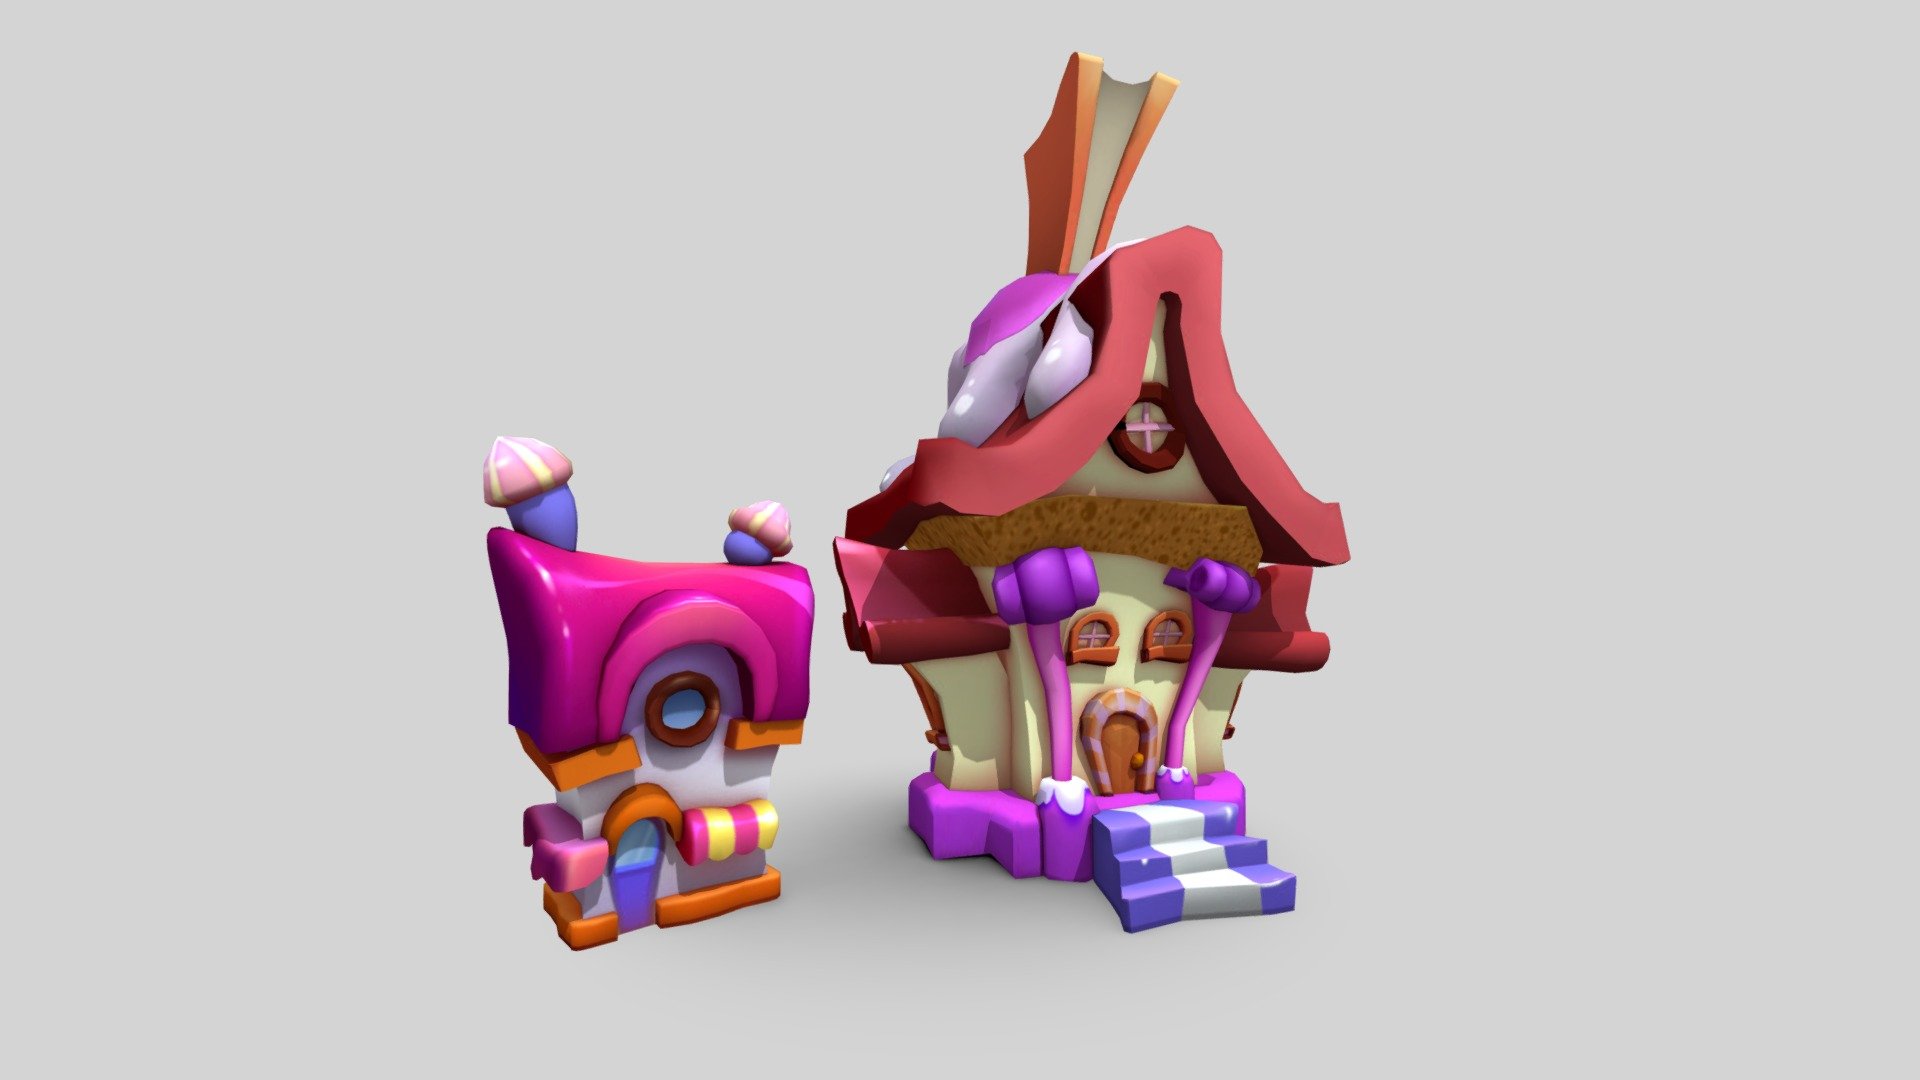 2 more candy houses for a casual game - Candy Houses - 3D model by Ximo! (@ximou22) 3d model